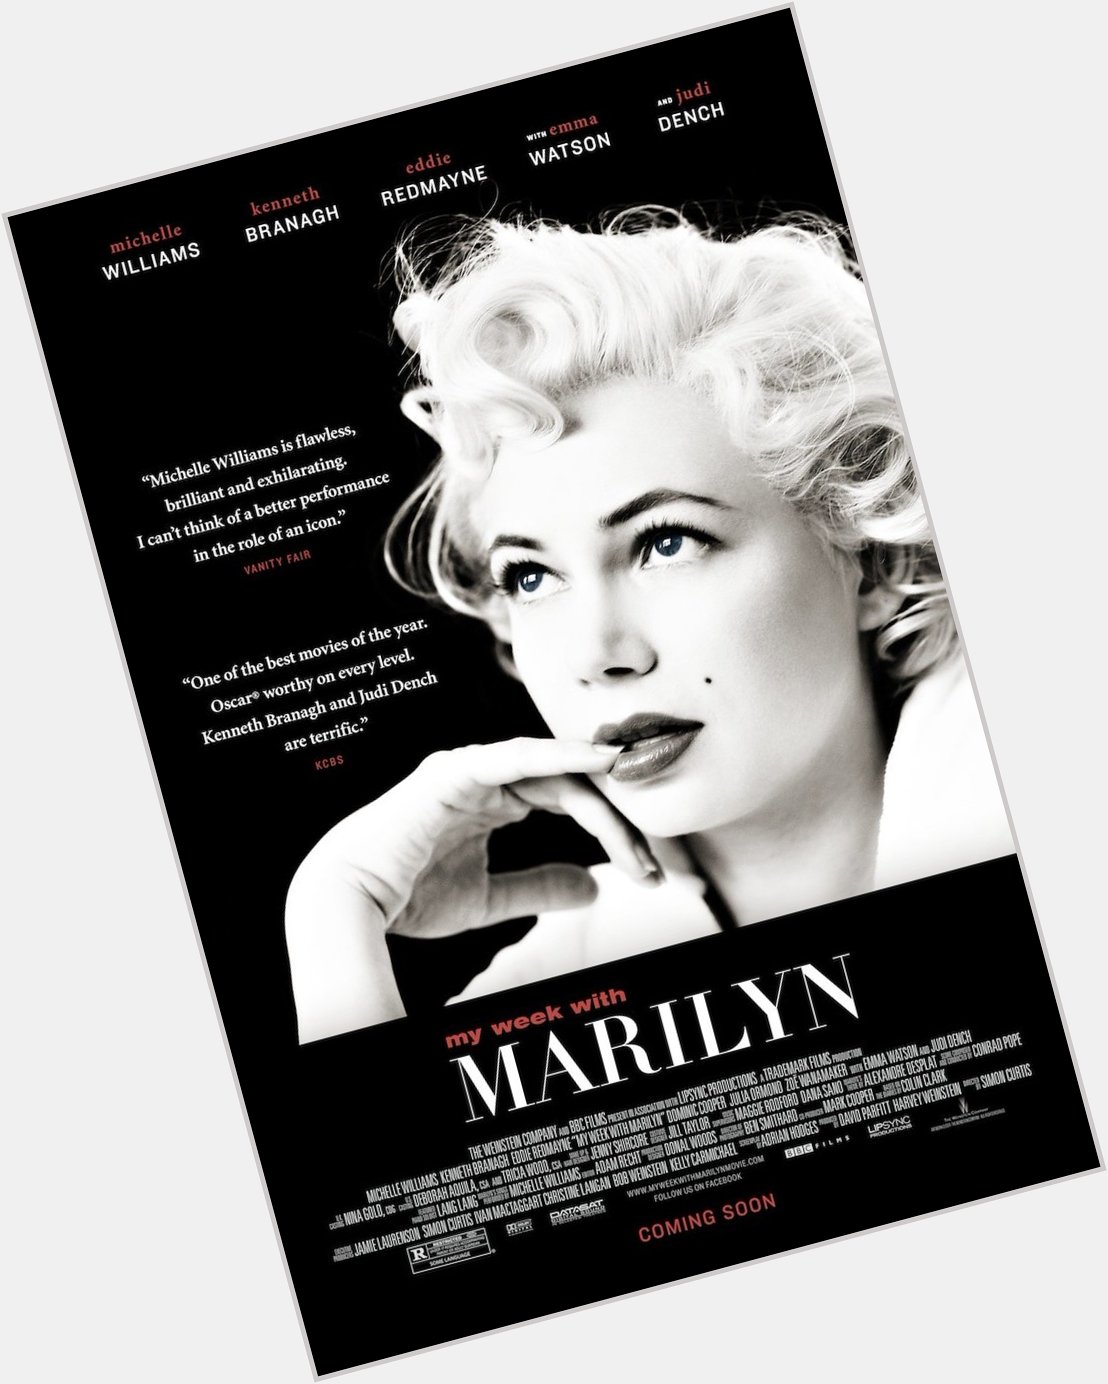 Today\s second movie , happy 42 birthday to Michelle Williams 

New watch 